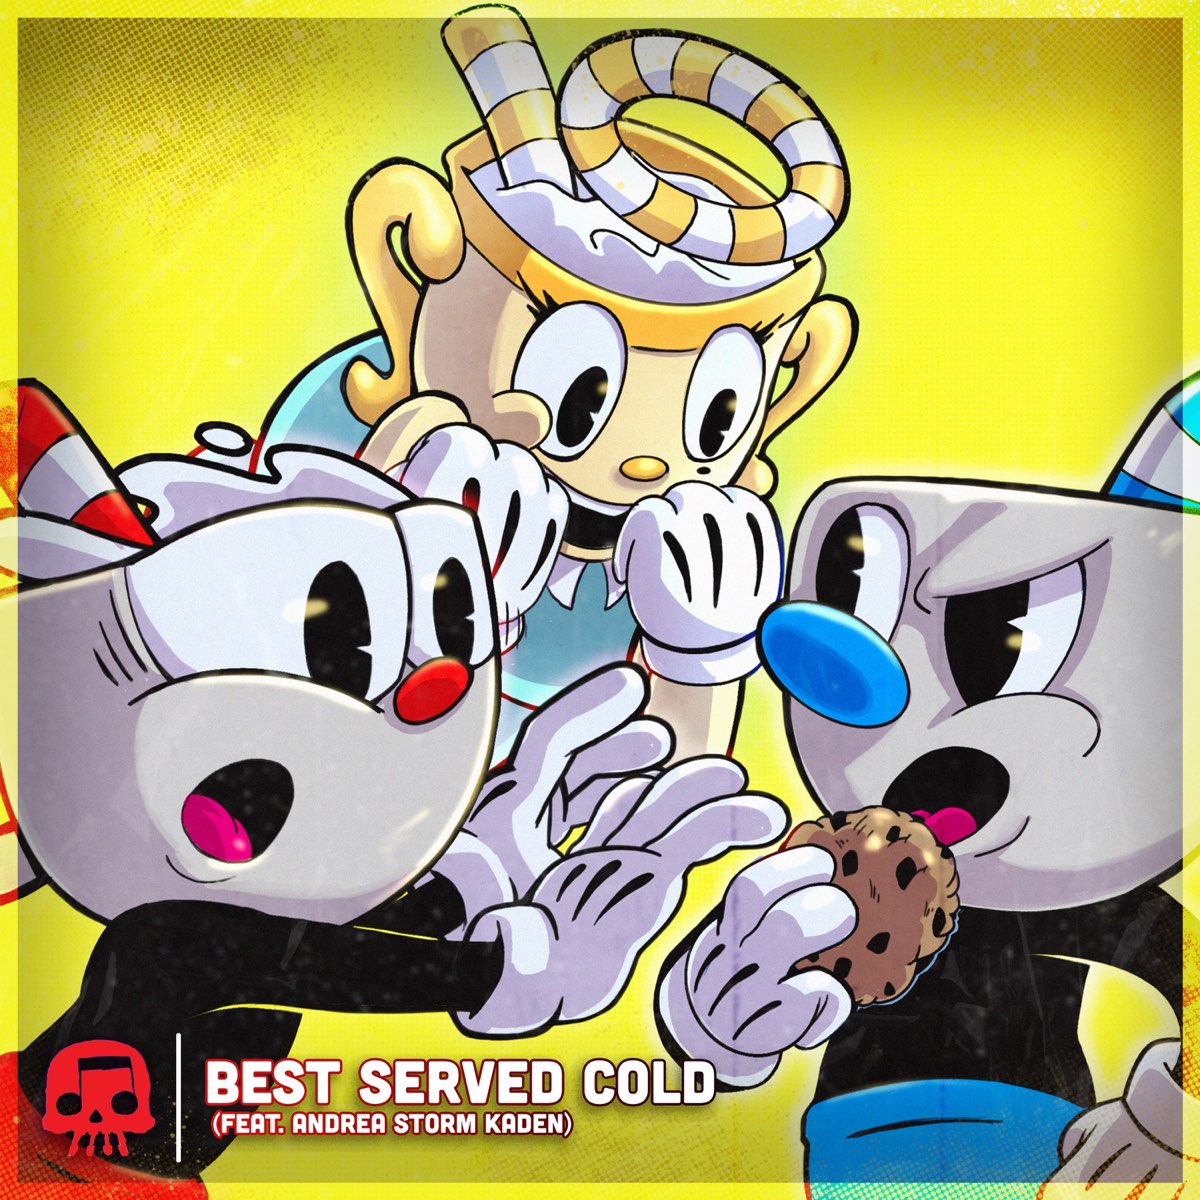 Served cold. Best served Cold. Cuphead the delicious last course. Best served Cold ~ Part 2 ыгпфкн ызшку. A Grudge served Cold.